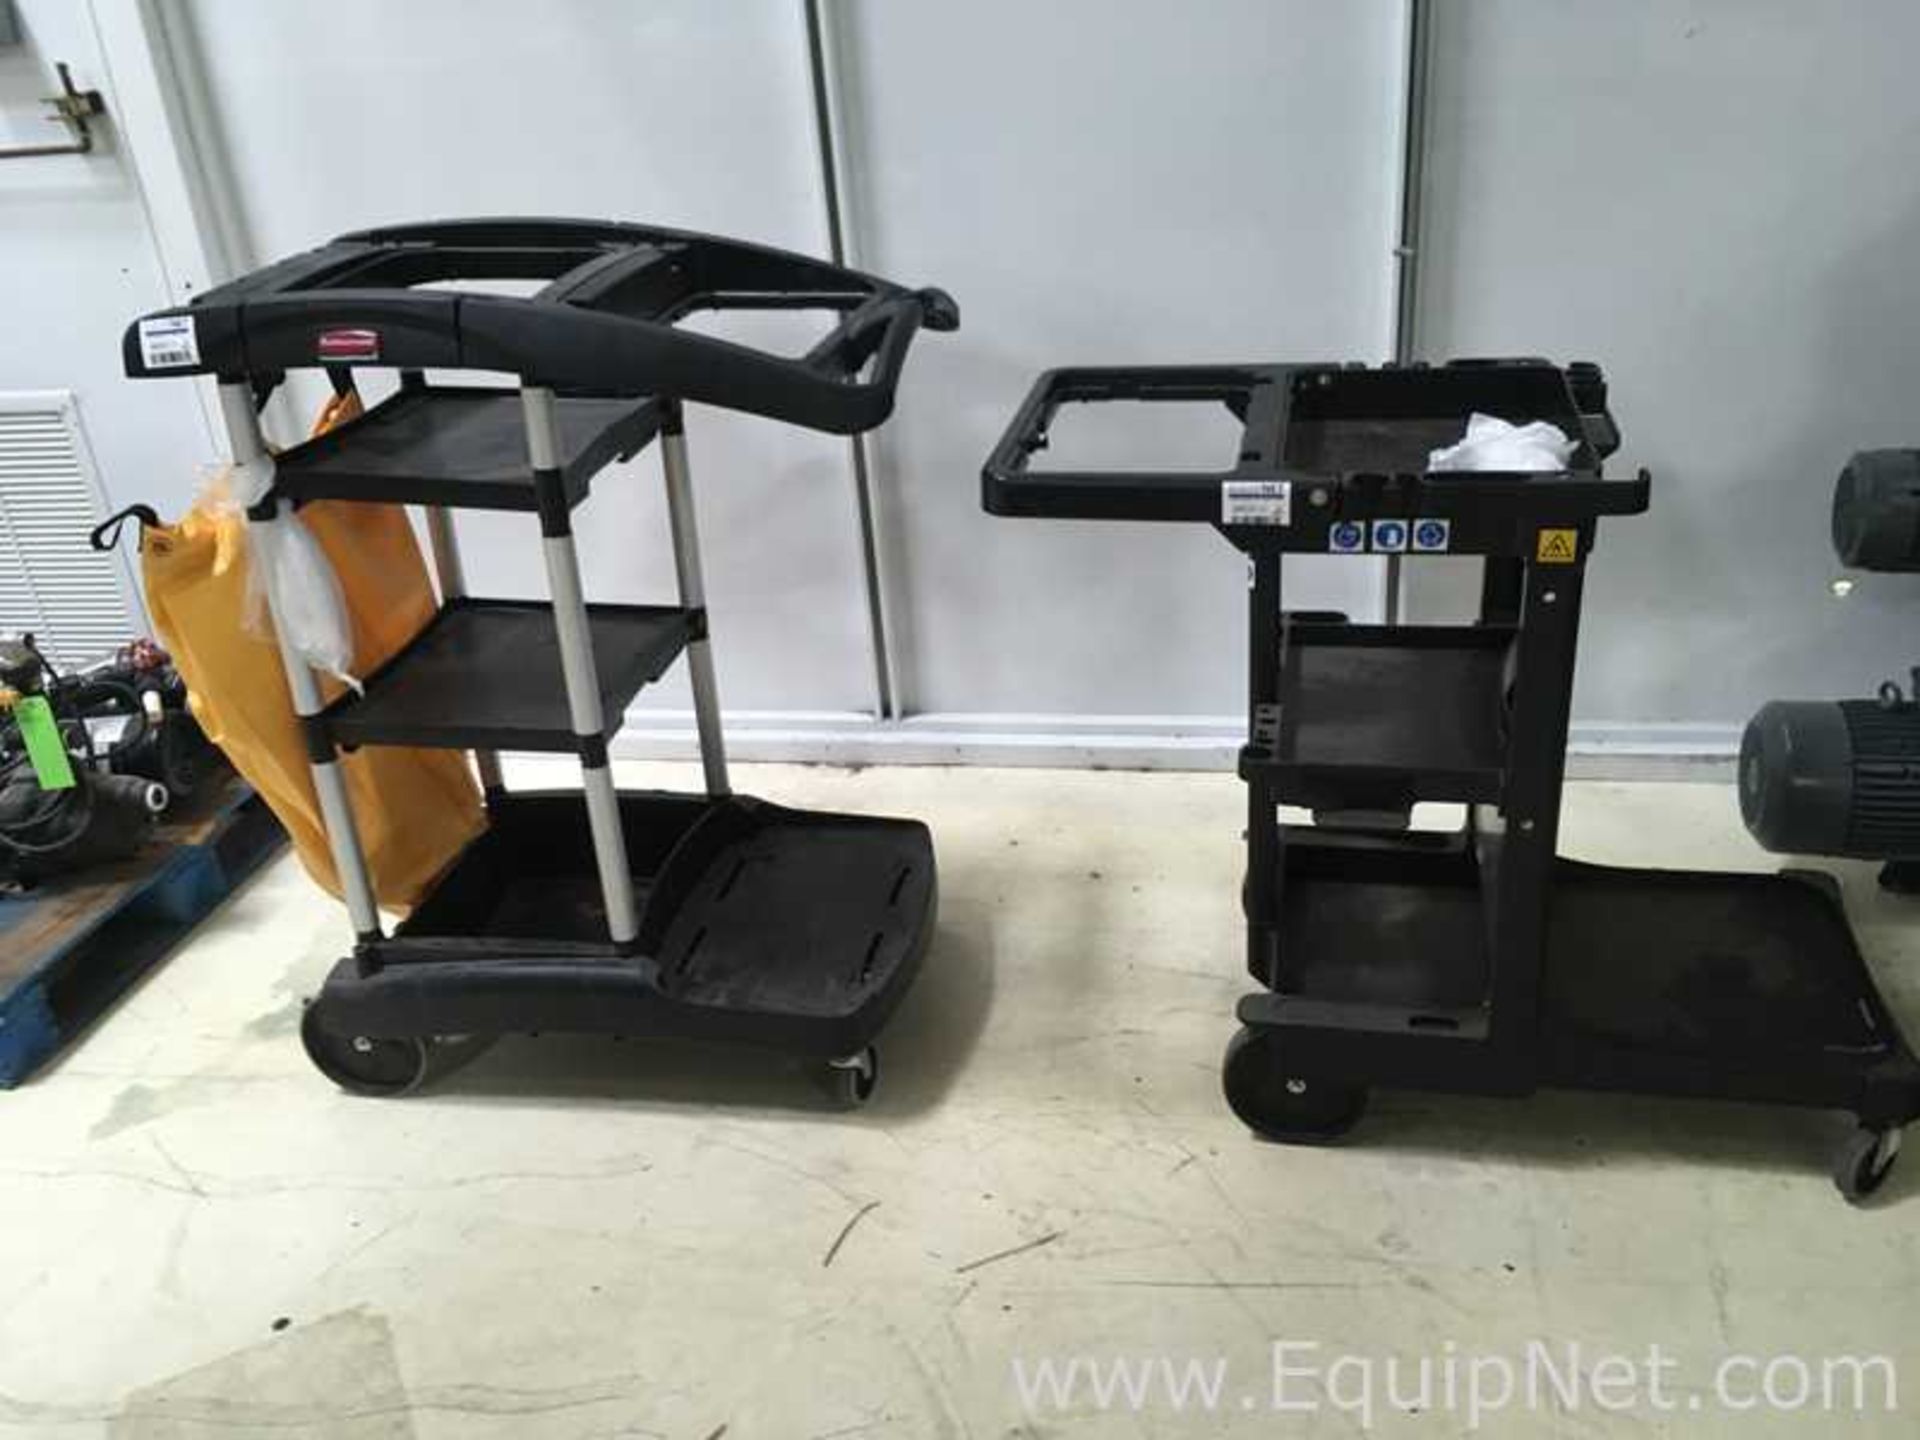 Lot of 2 Janitorial Carts